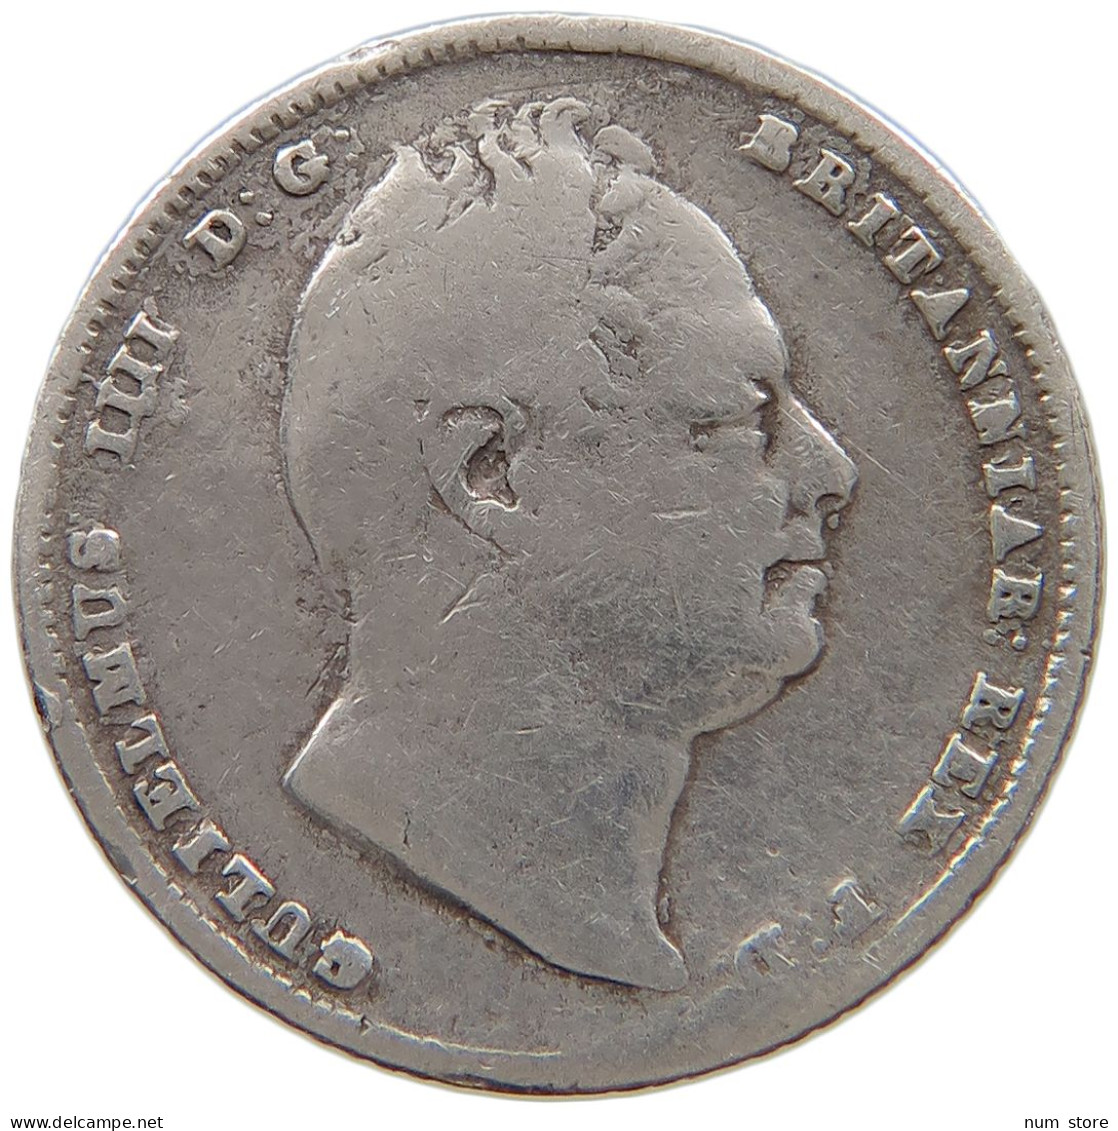 GREAT BRITAIN SIXPENCE 1834 WILLIAM IV. (1830-1837) #a064 0303 - H. 6 Pence